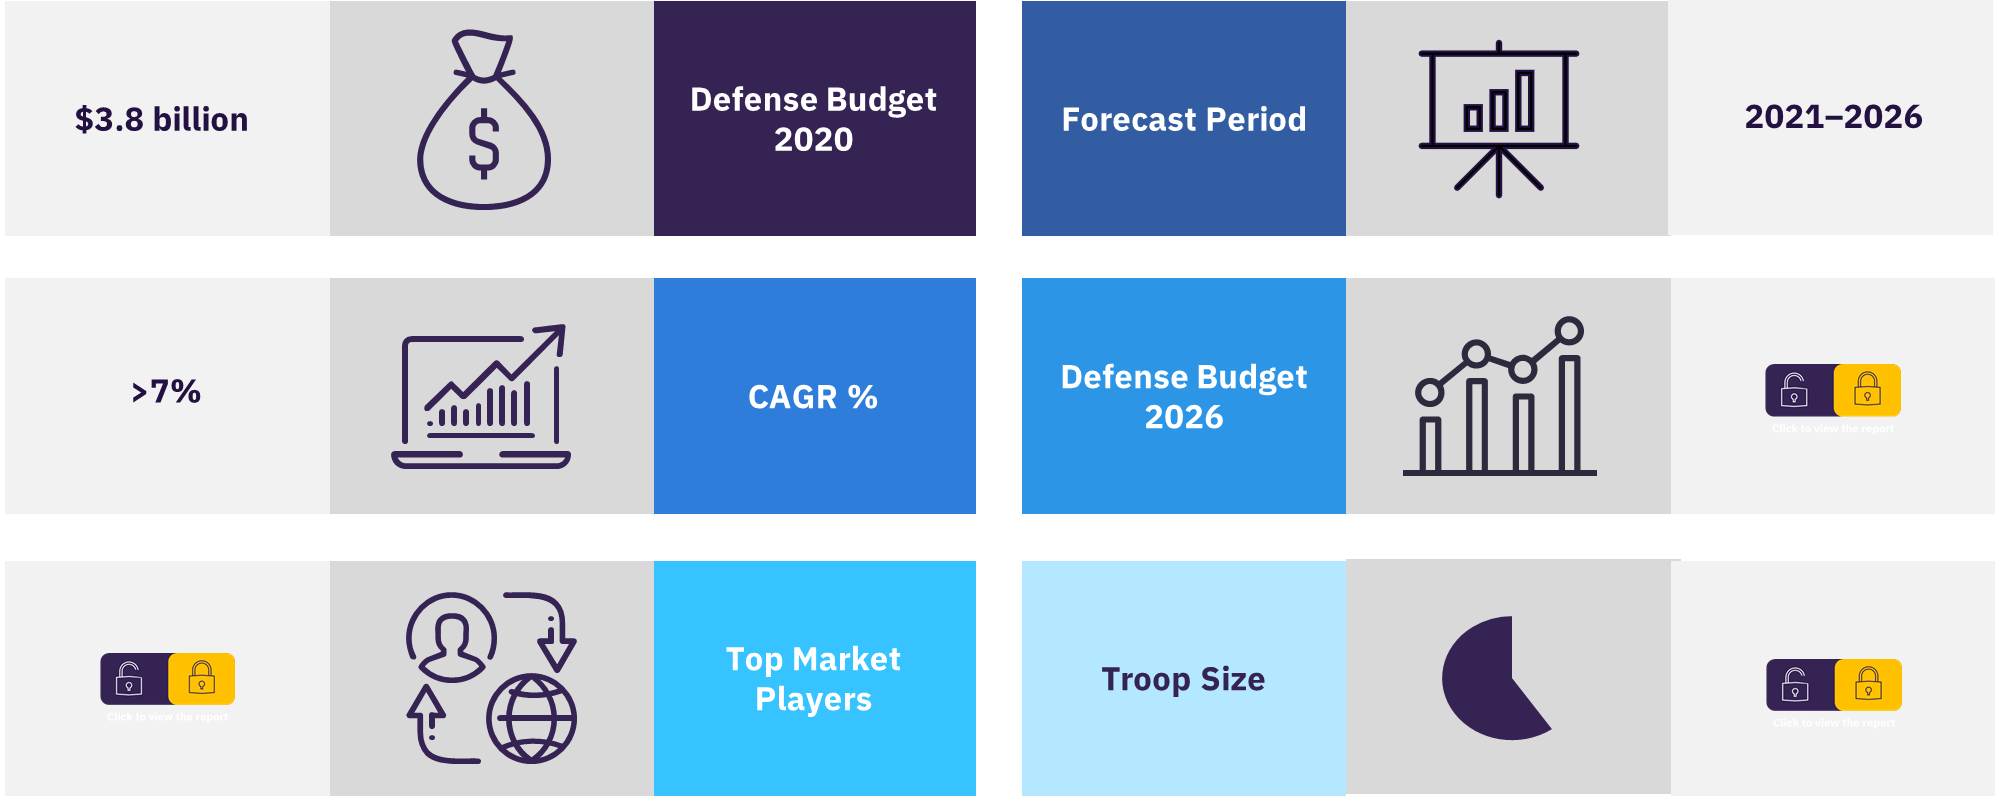 Overview of the defense market in the Philippines